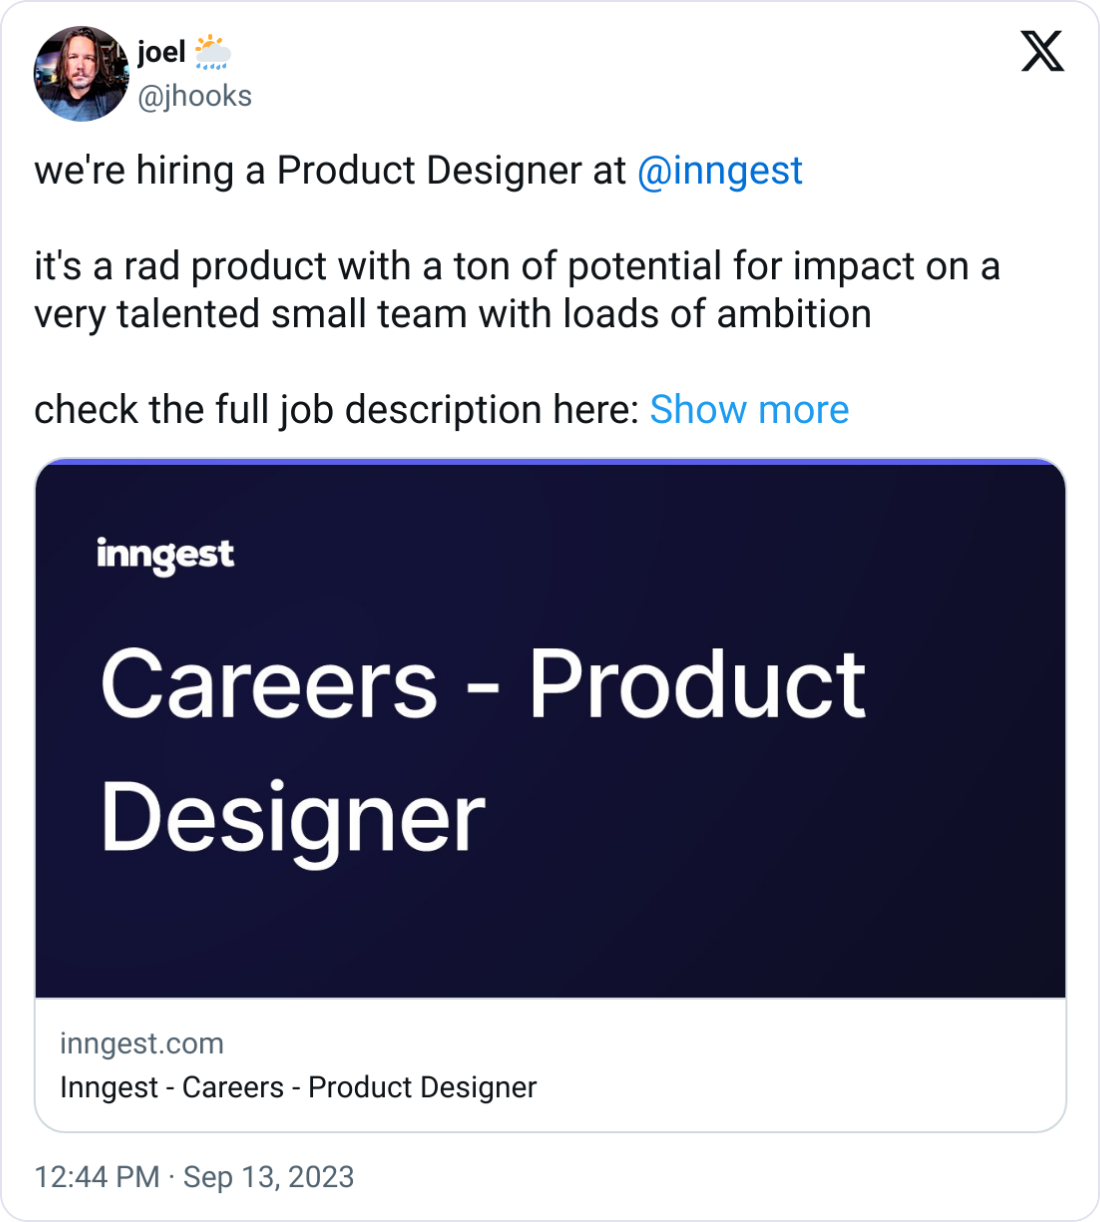 joel 🌦️ @jhooks we're hiring a Product Designer at  @inngest    it's a rad product with a ton of potential for impact on a very talented small team with loads of ambition  check the full job description here: https://inngest.com/careers/product-designer